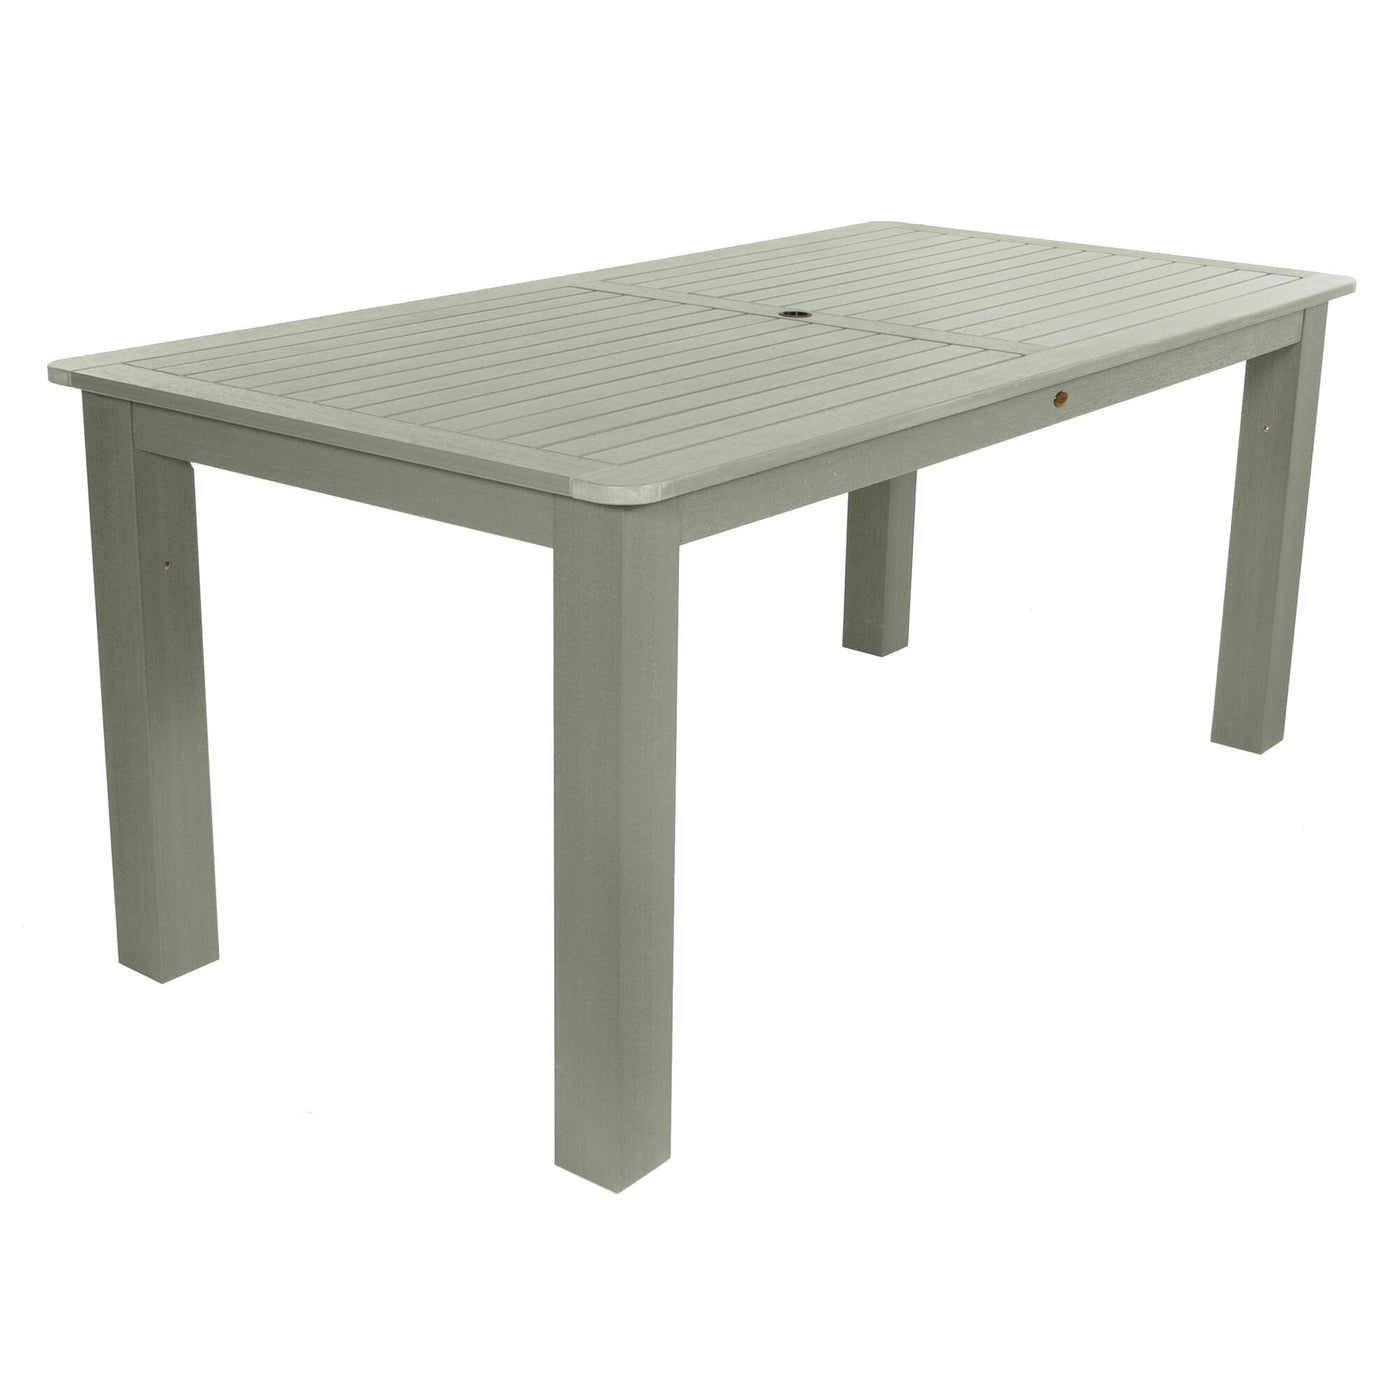 Rectangular 42in x 72in Outdoor Dining Table - Dining Height Dining Highwood USA Eucalyptus 